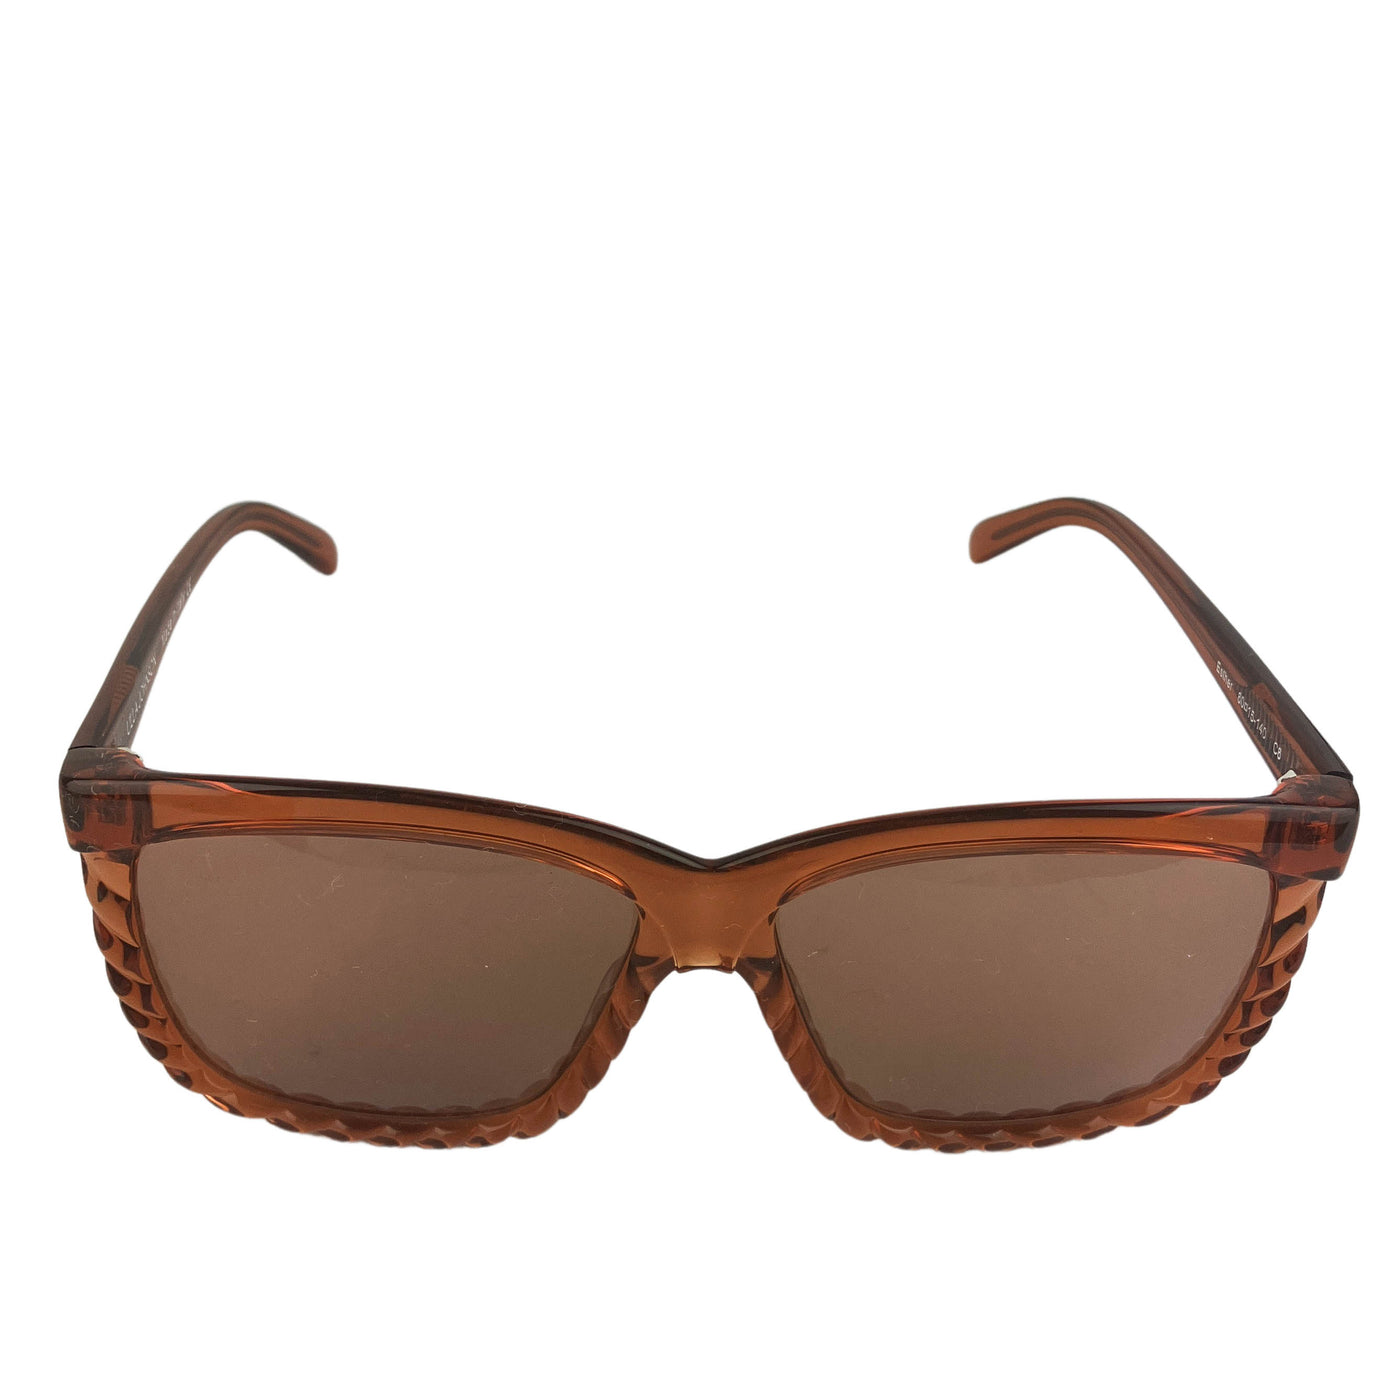 Ulla Johnson Esther Sunglasses in Umber - Discounts on Ulla Johnson at UAL